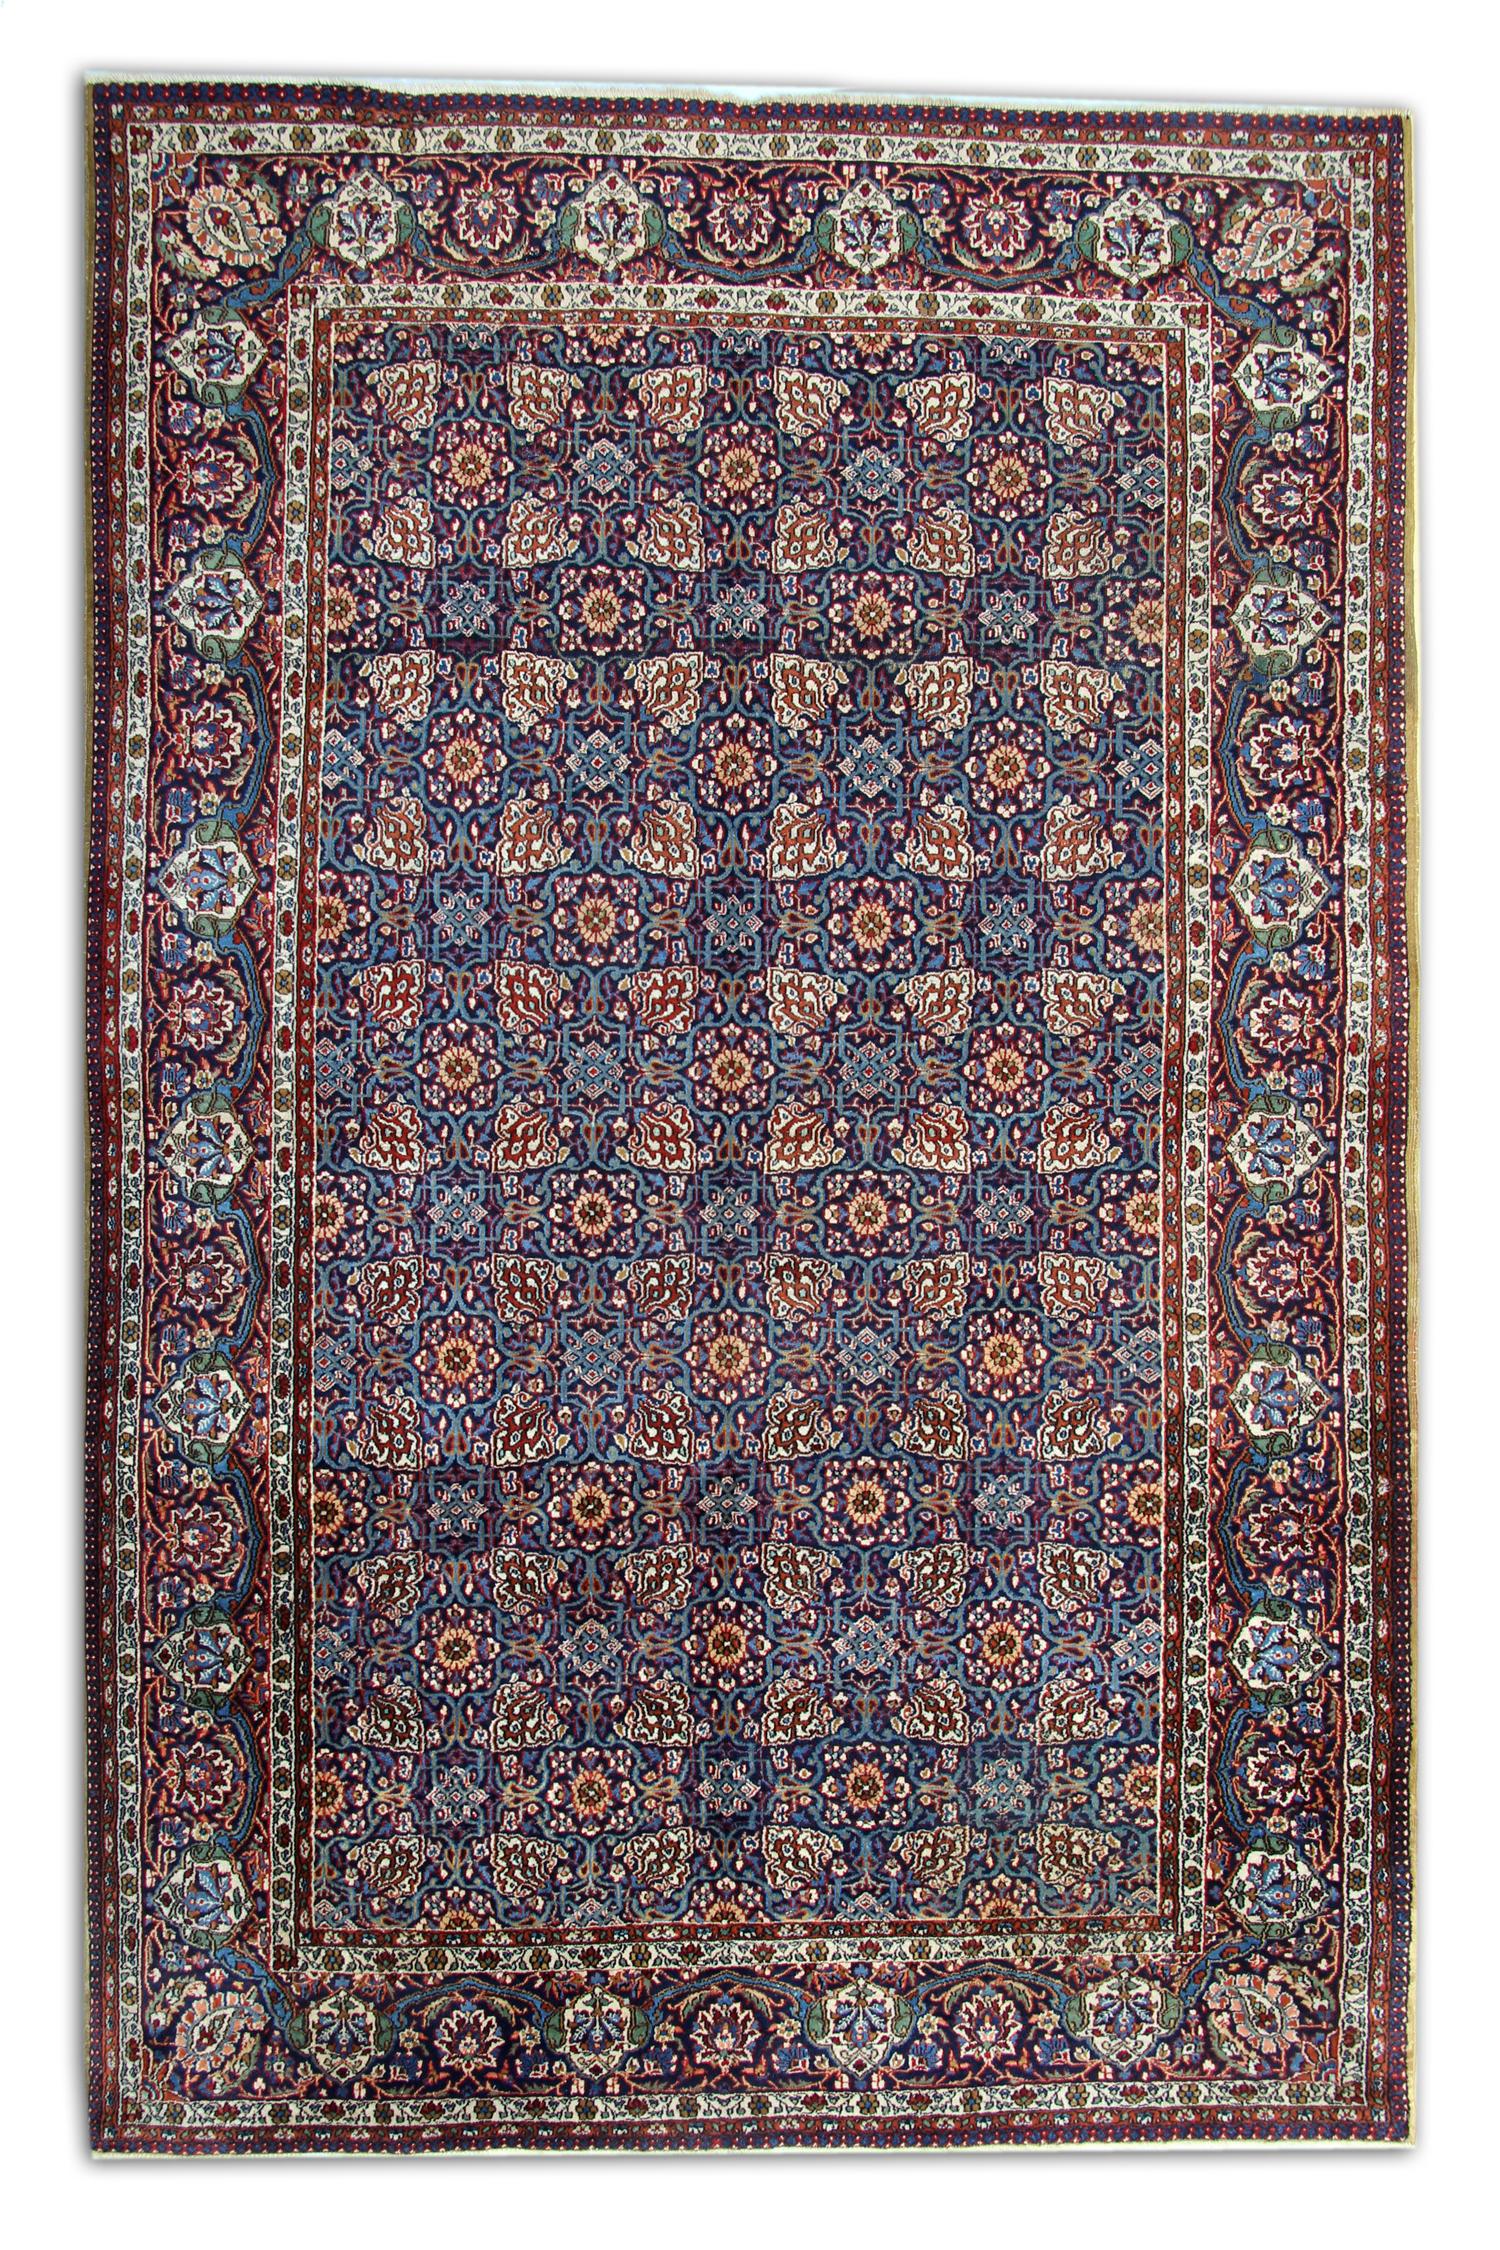 Vegetable Dyed Antique Rugs Oriental Wool Blue Rug Geometric Living Room Rugs for Sale 137x207 For Sale